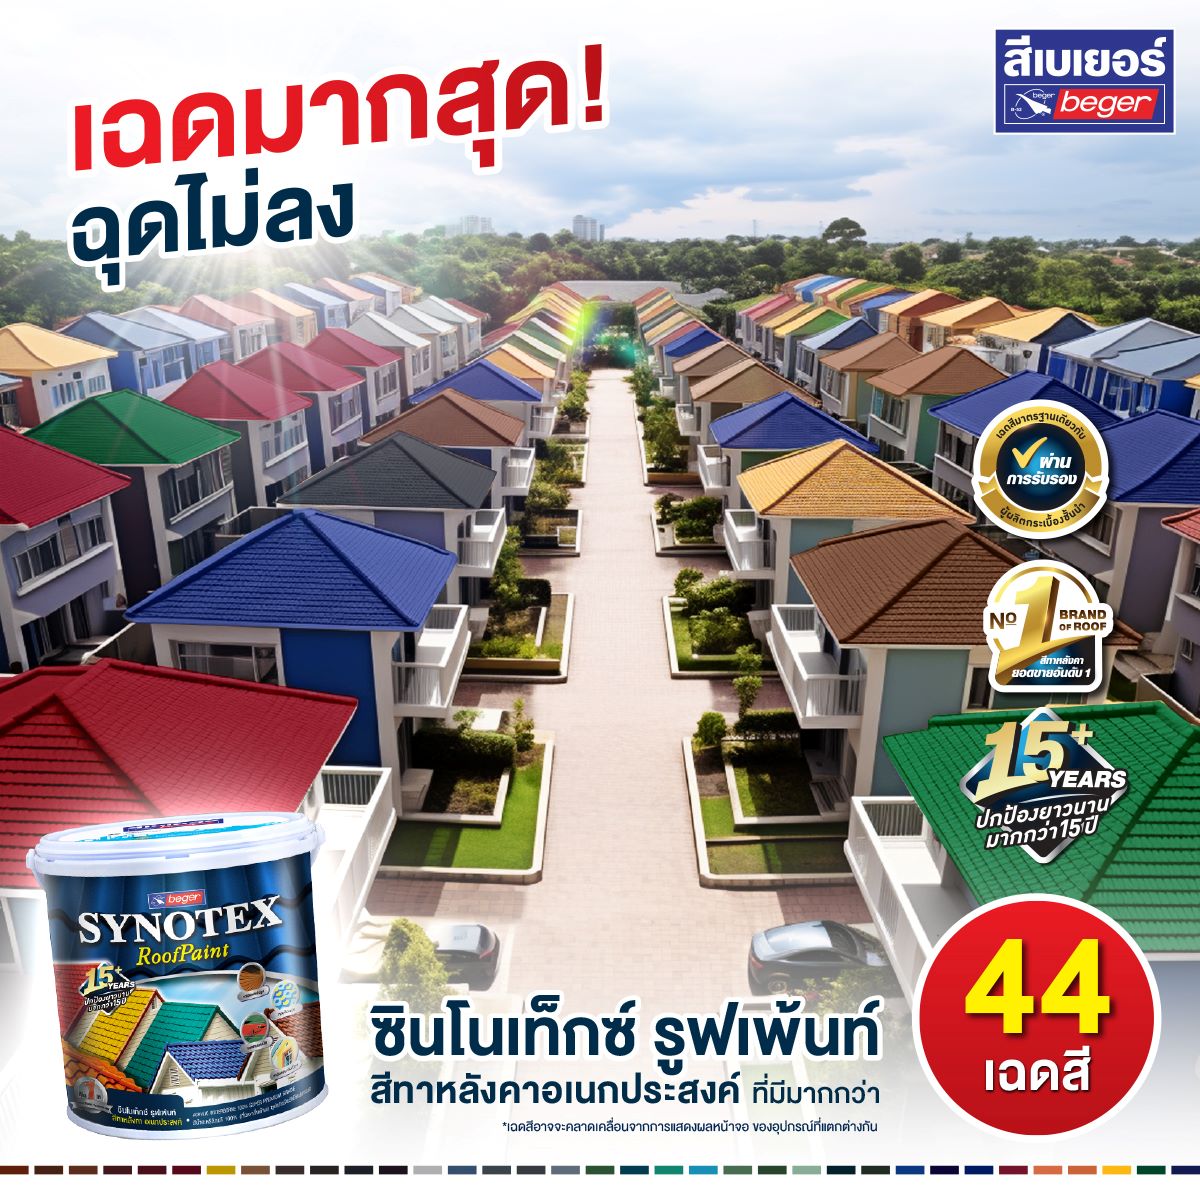 synotex roof paint 44 สี